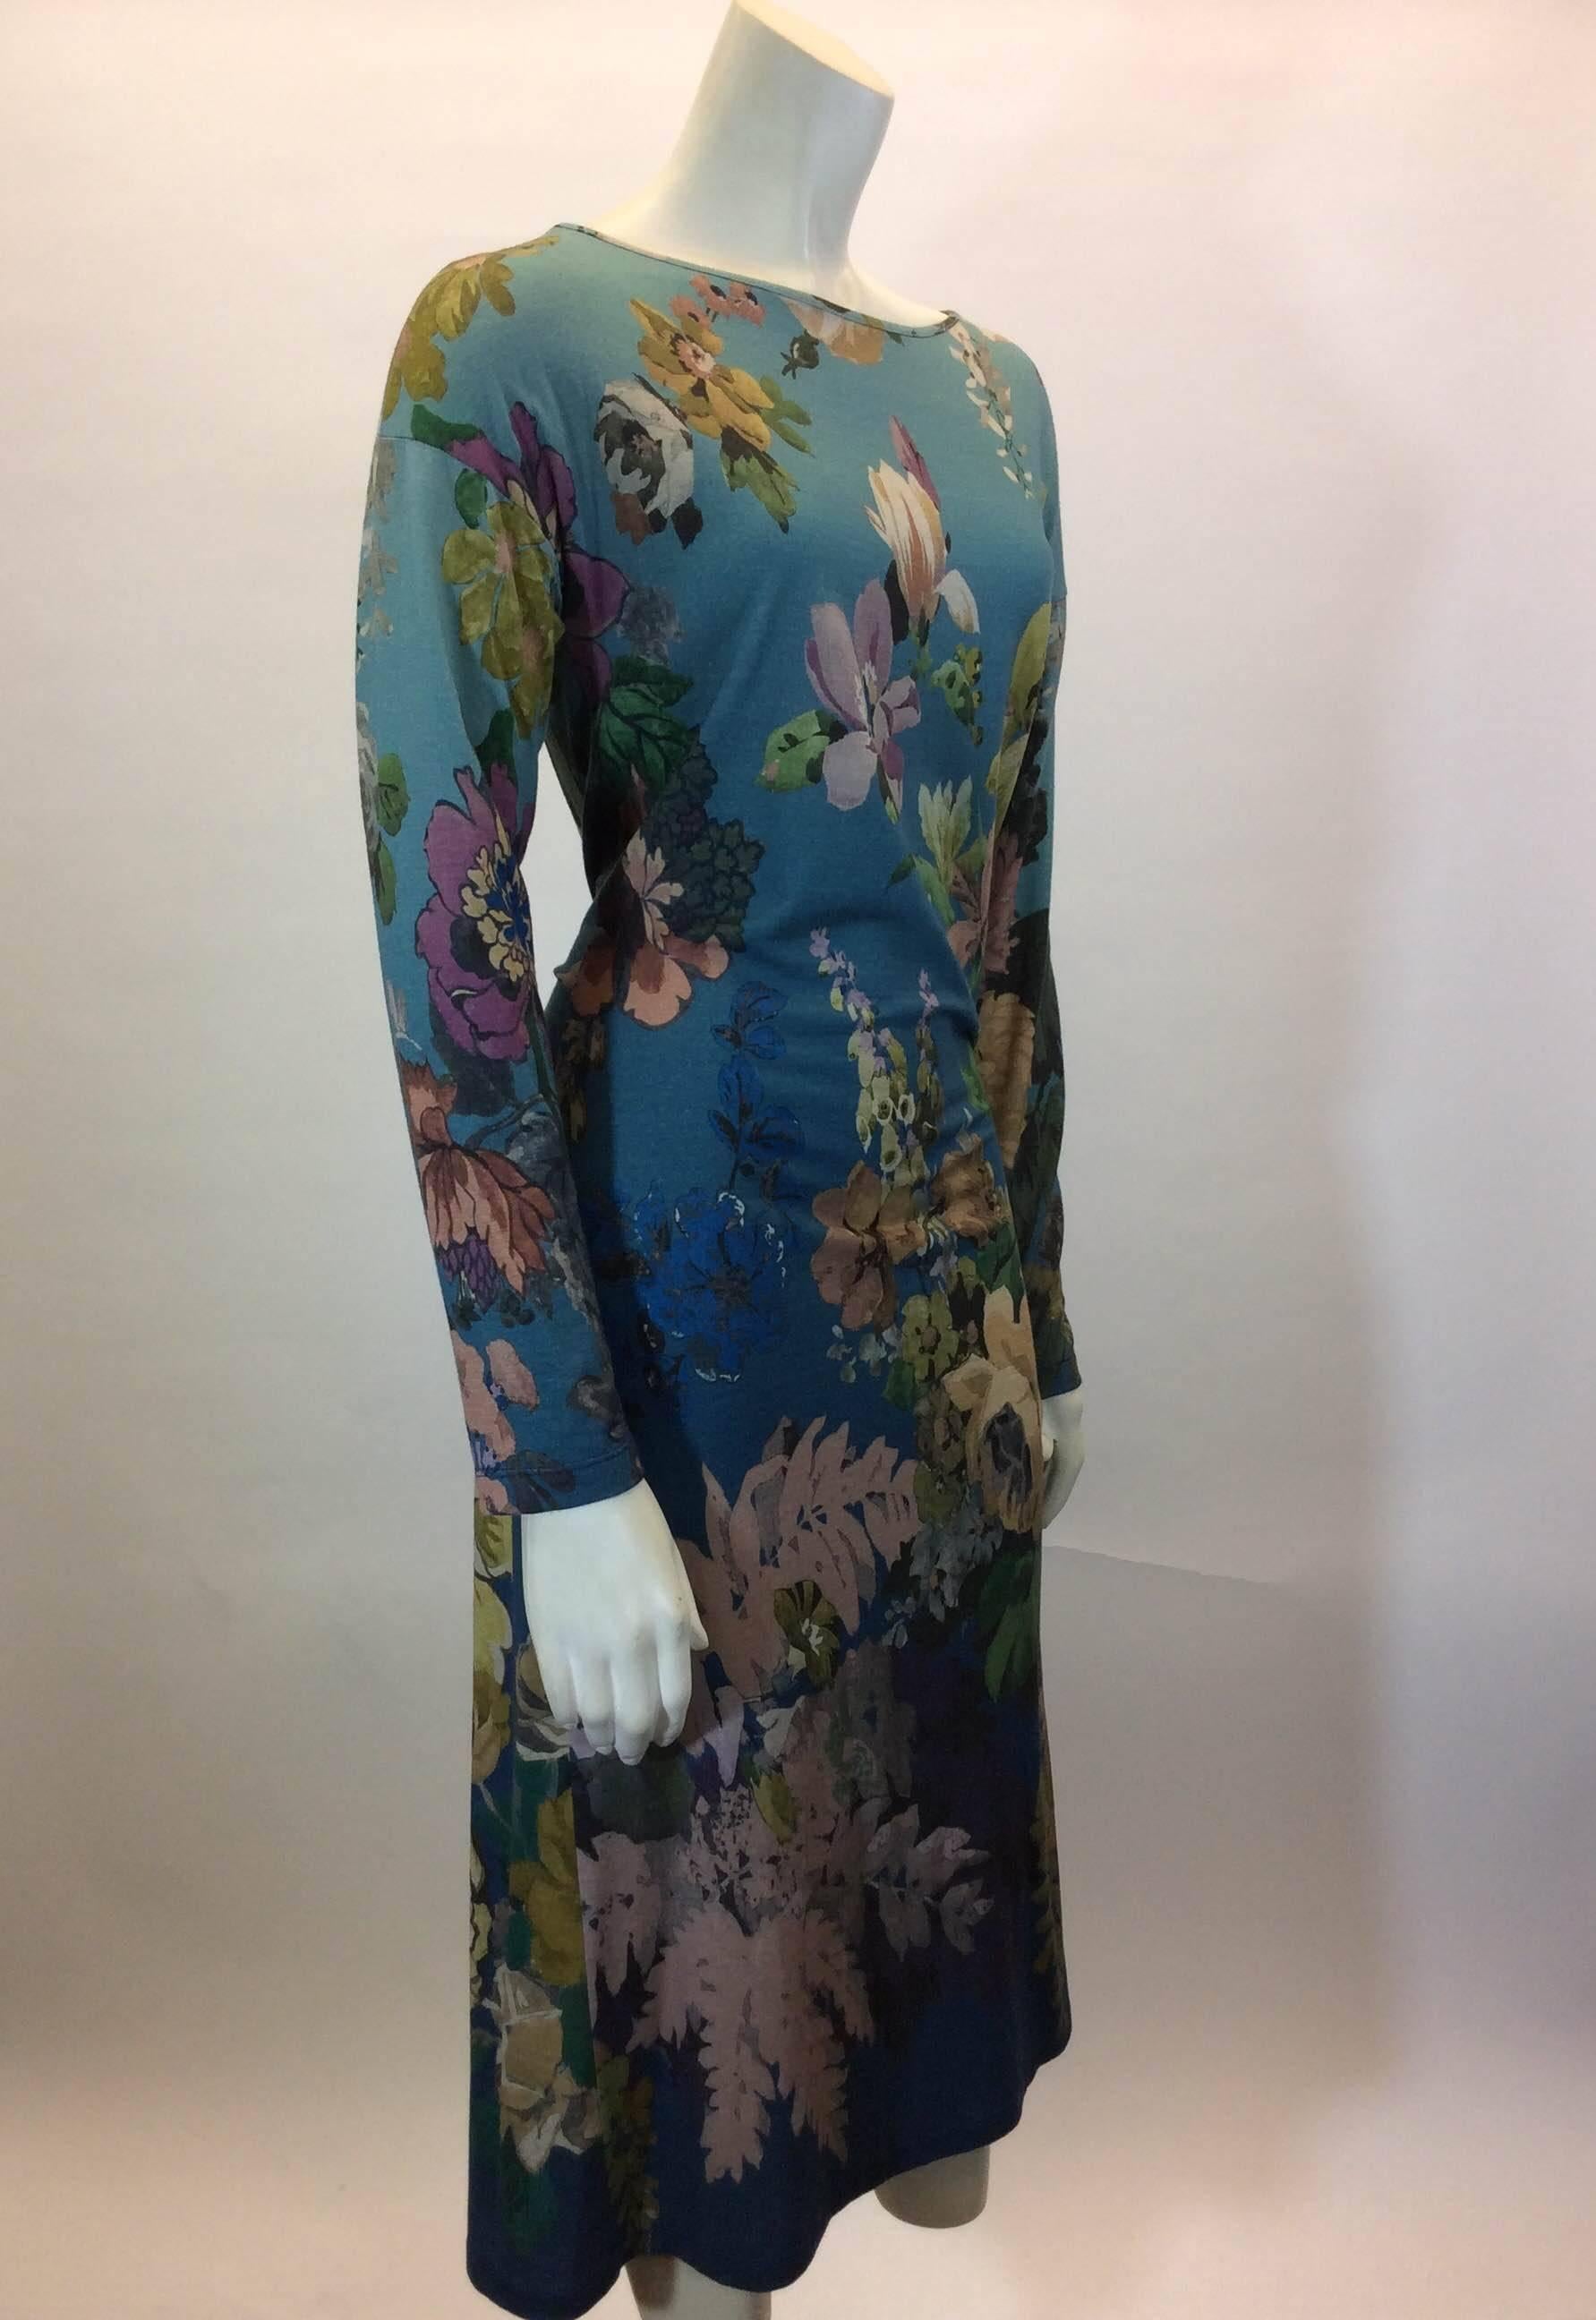 Beautiful Floral Textile Print 
Comfortable Stretch Material 
Long Sleeves with Midi Length Hem
Italy Size 48 Equates to US 14
